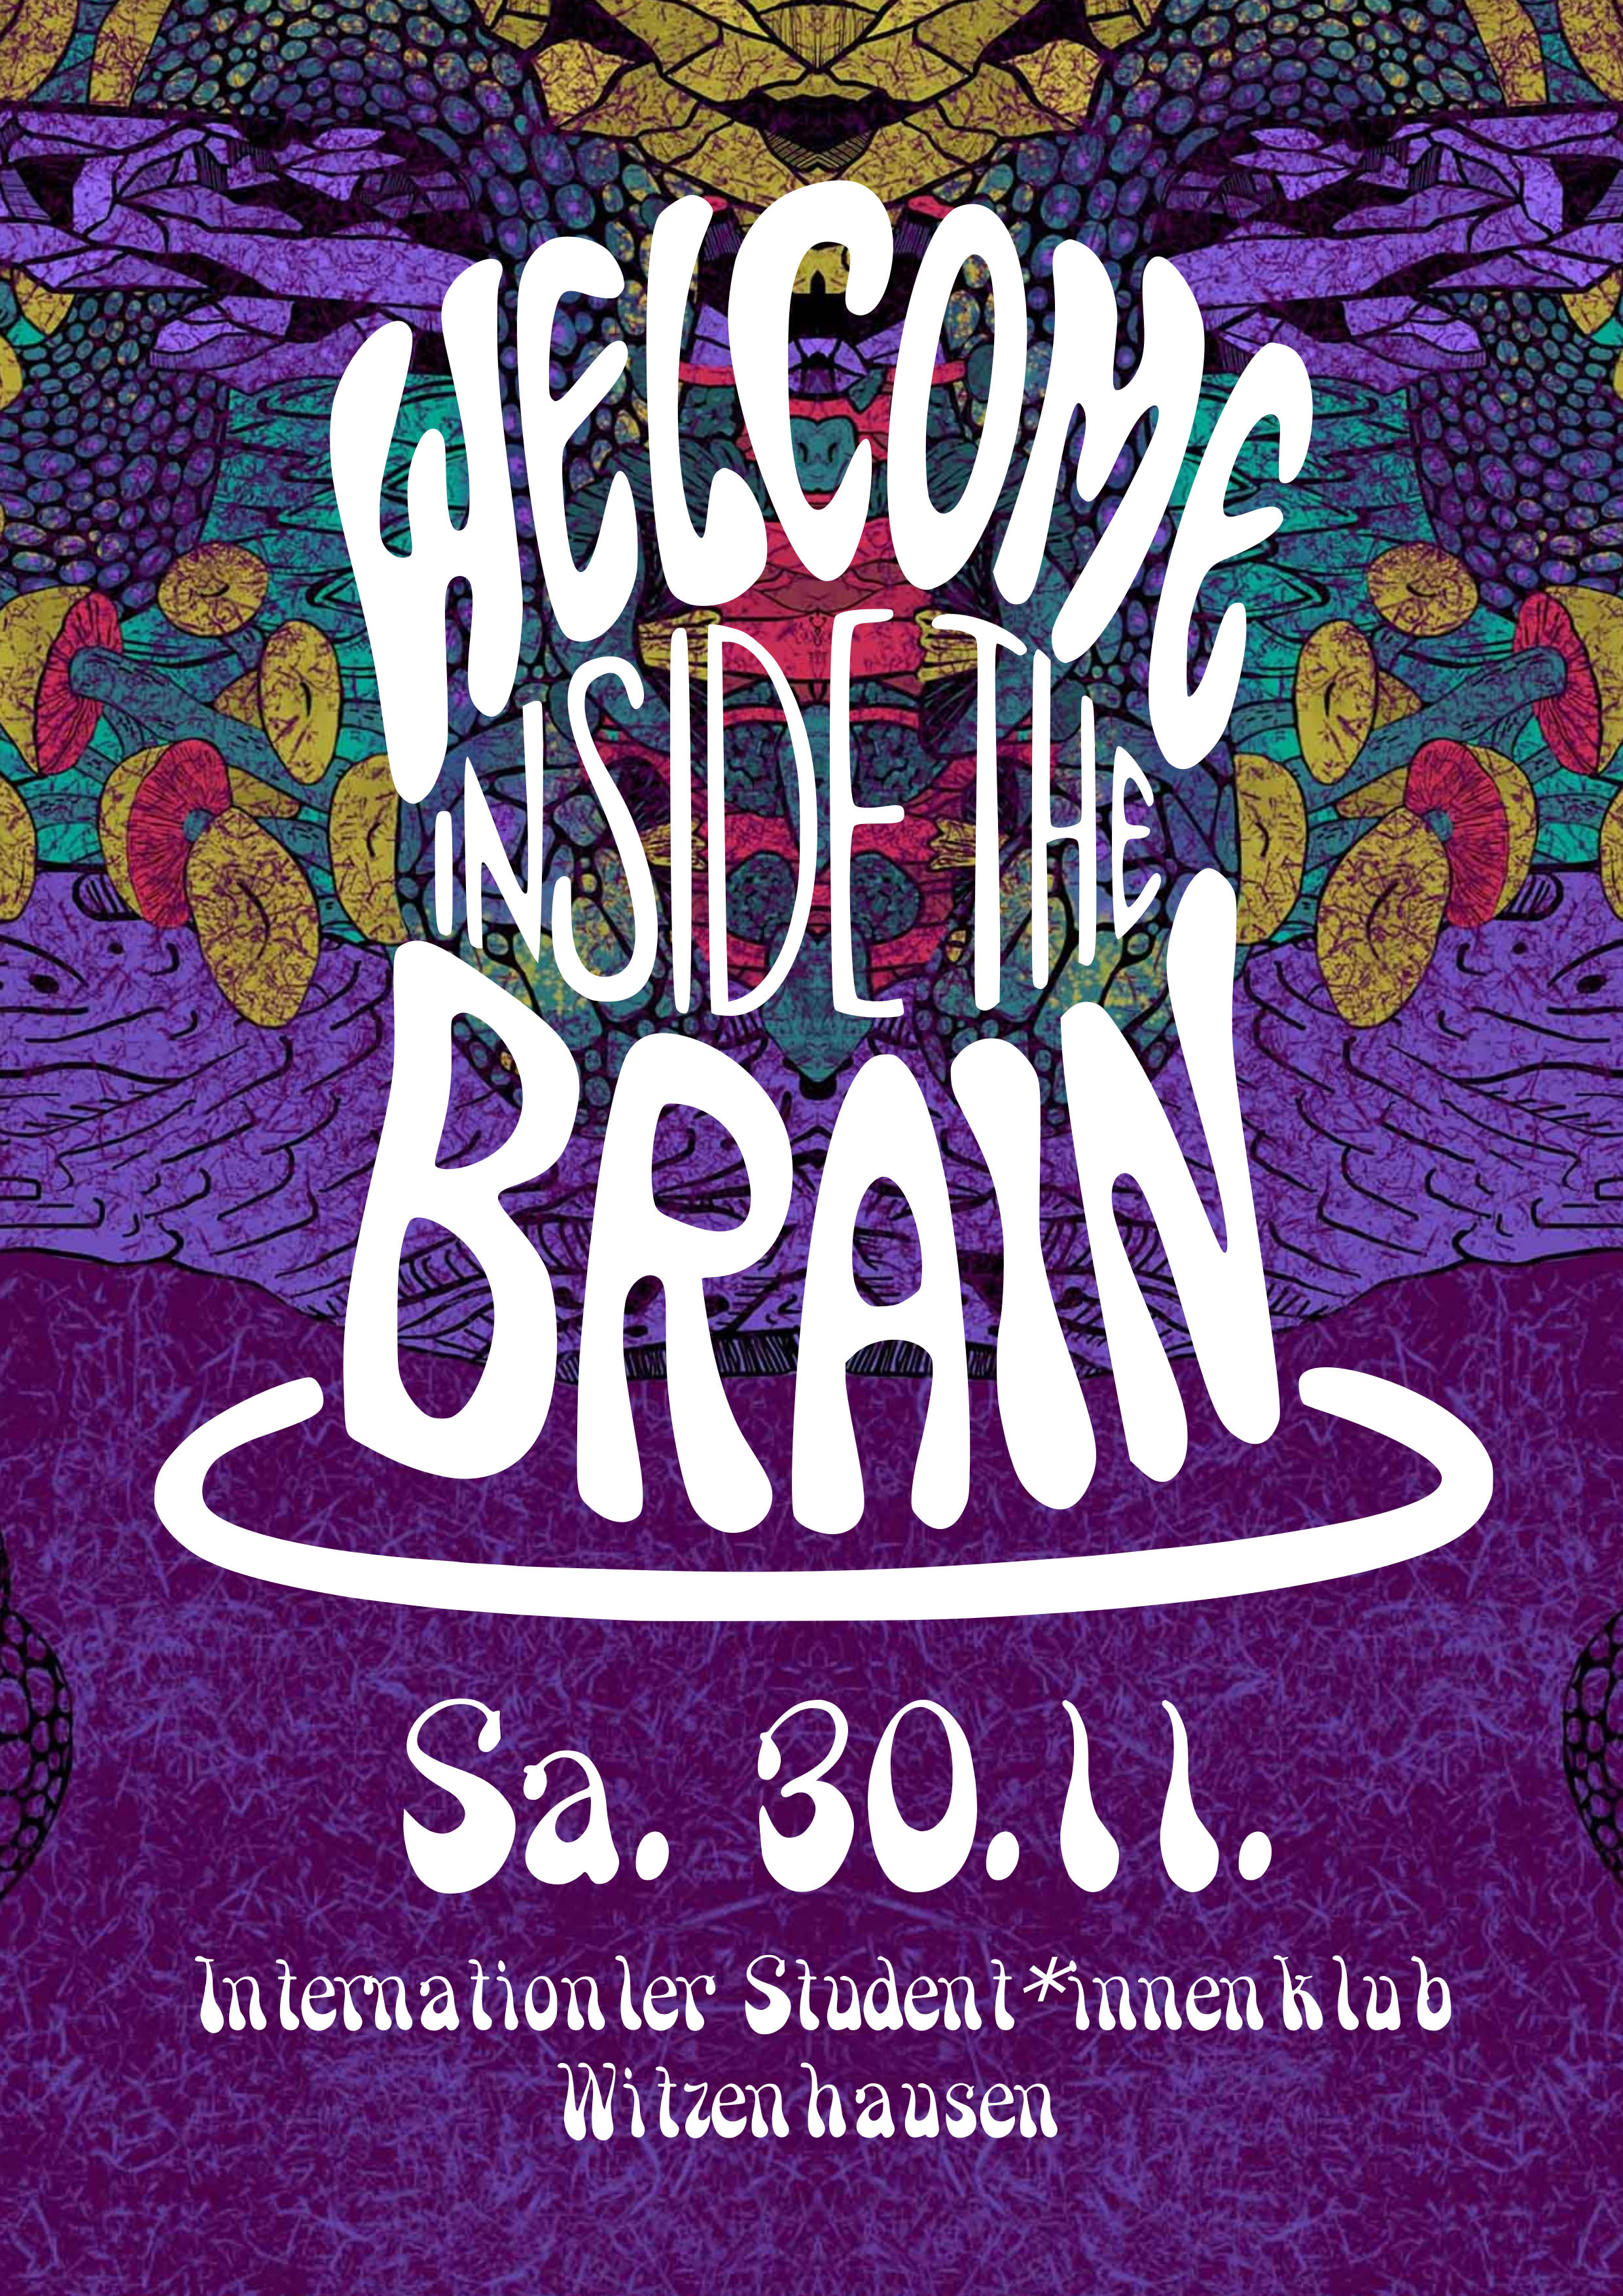 Welcome inside the Brain 2019